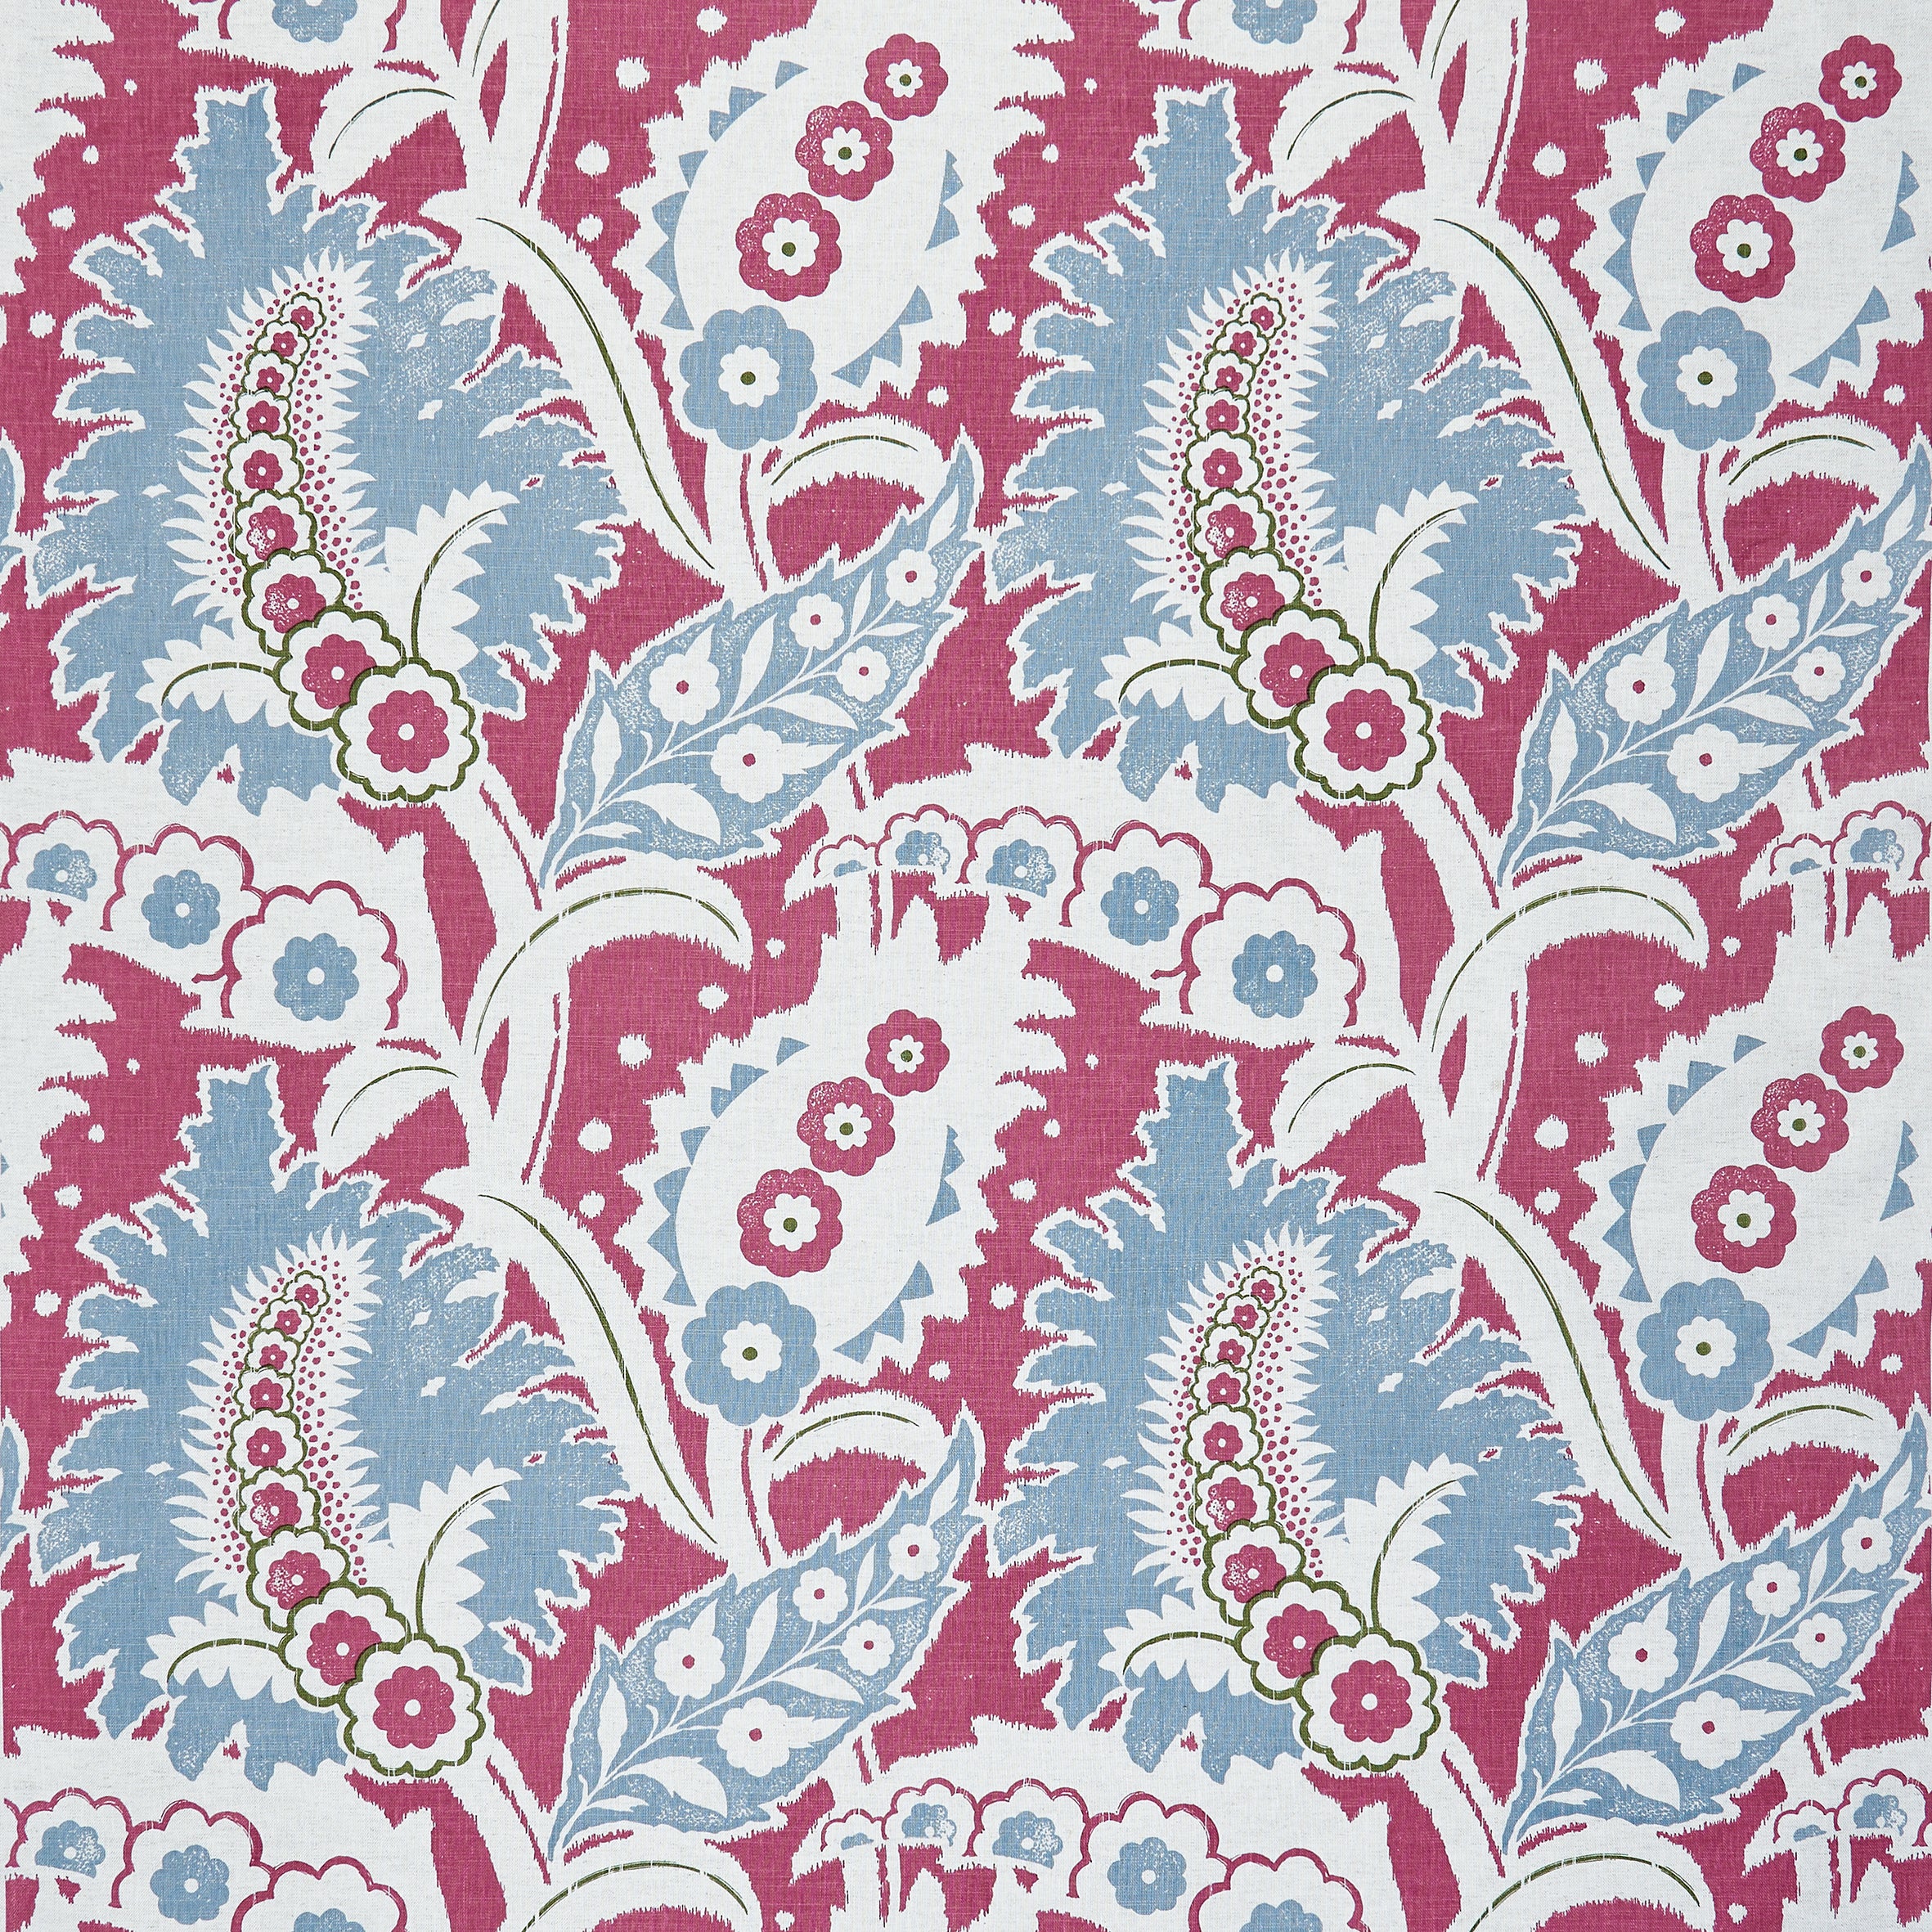 Detail of fabric in a botanical paisley print in shades of white, blue and green on a pink field.